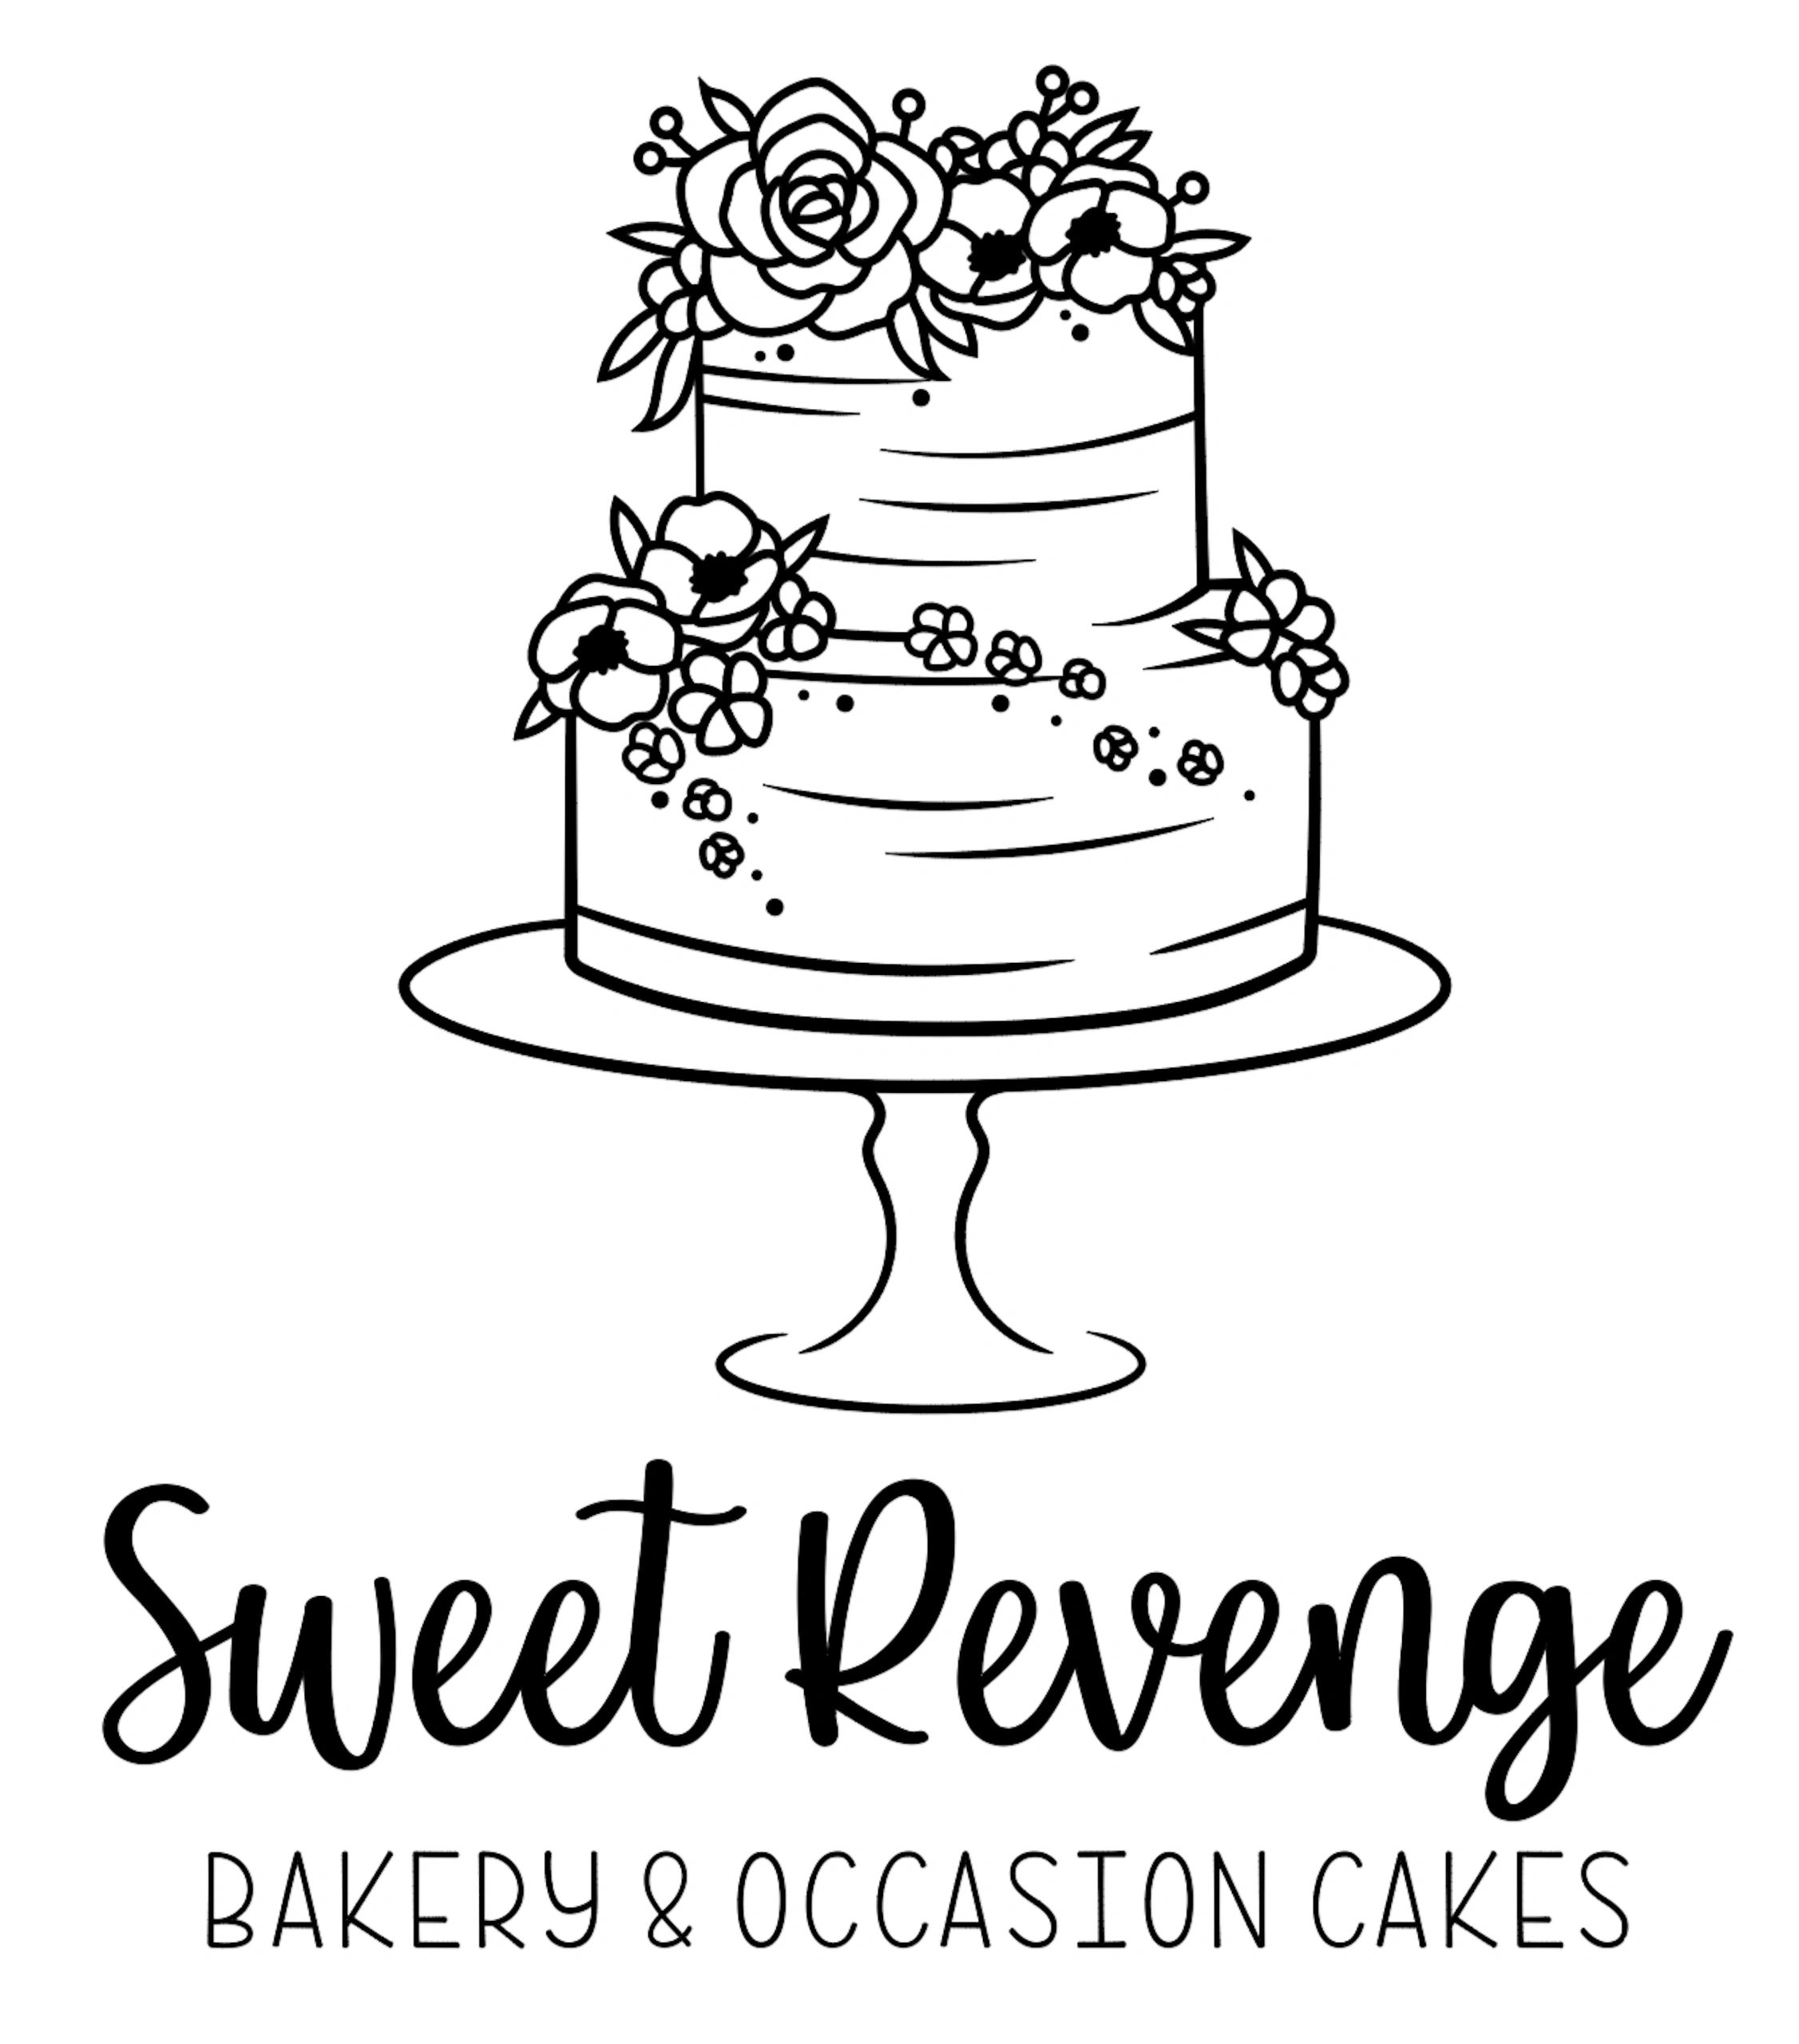 Sweet Revenge Bakery and Occasion Cakes - Bakery, Cupcakes